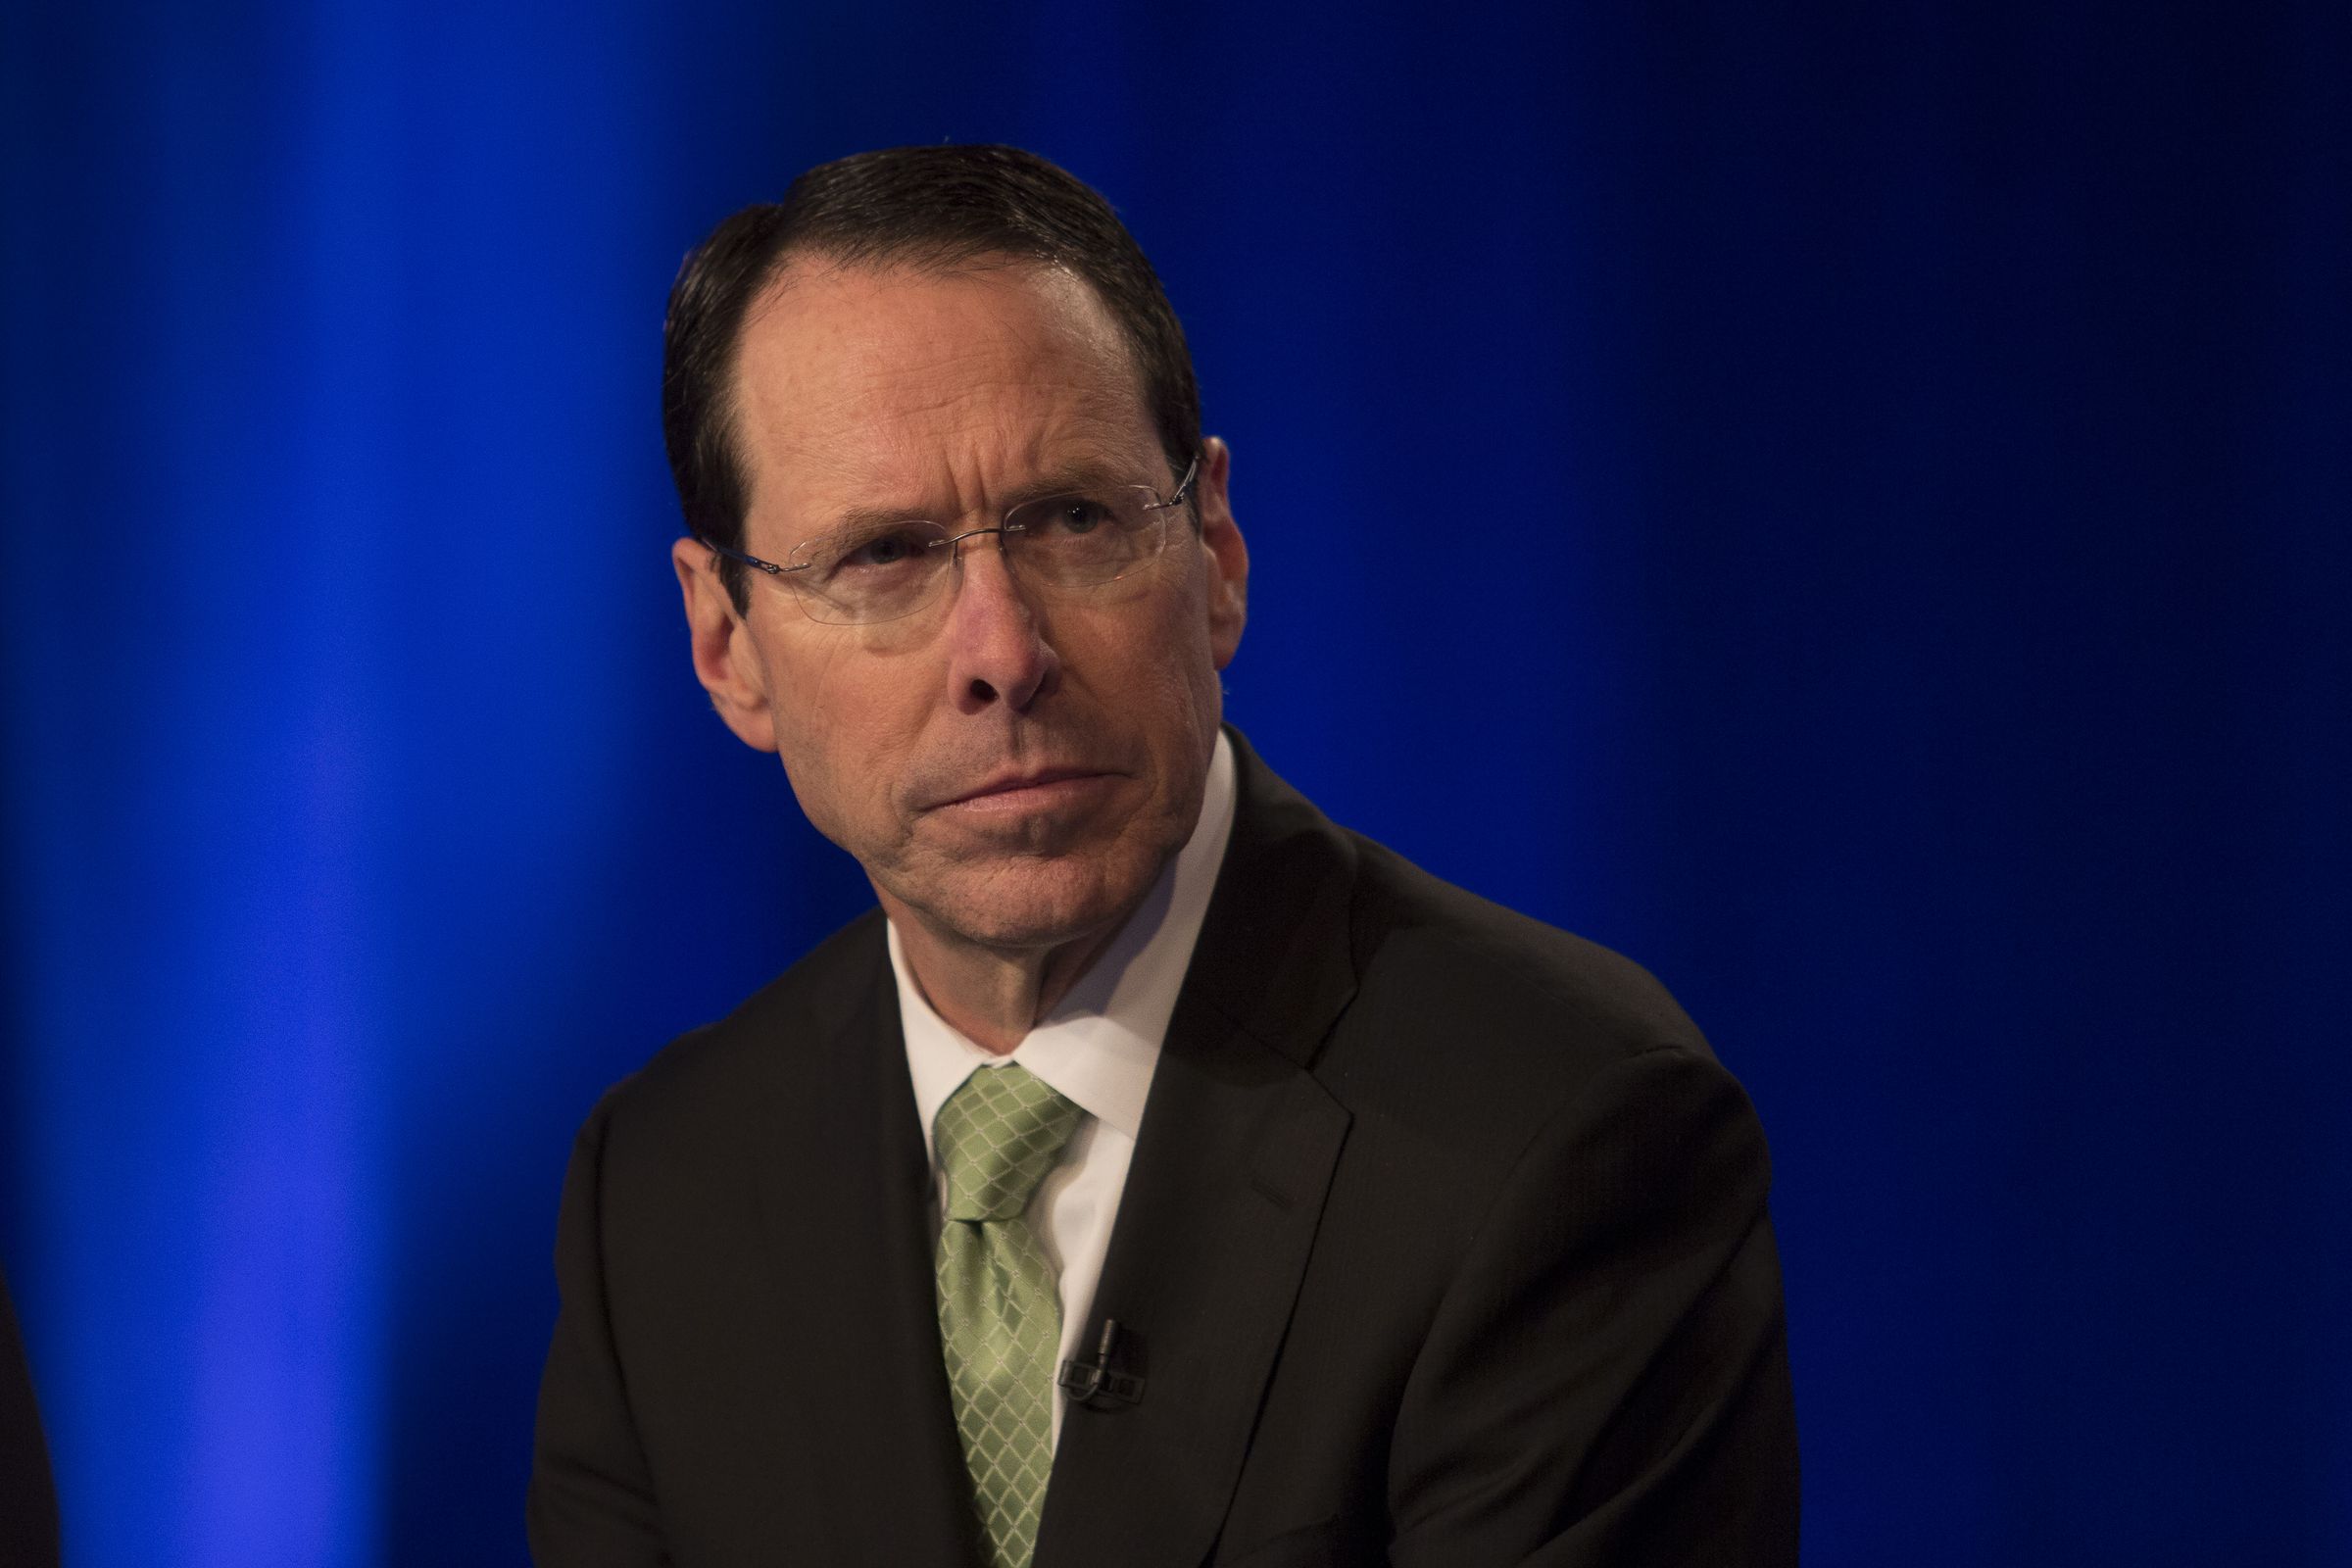 AT&amp;T CEO Randall Stephenson Discusses Justice Dept. Lawsuit Over Company’s Time Warner Merger